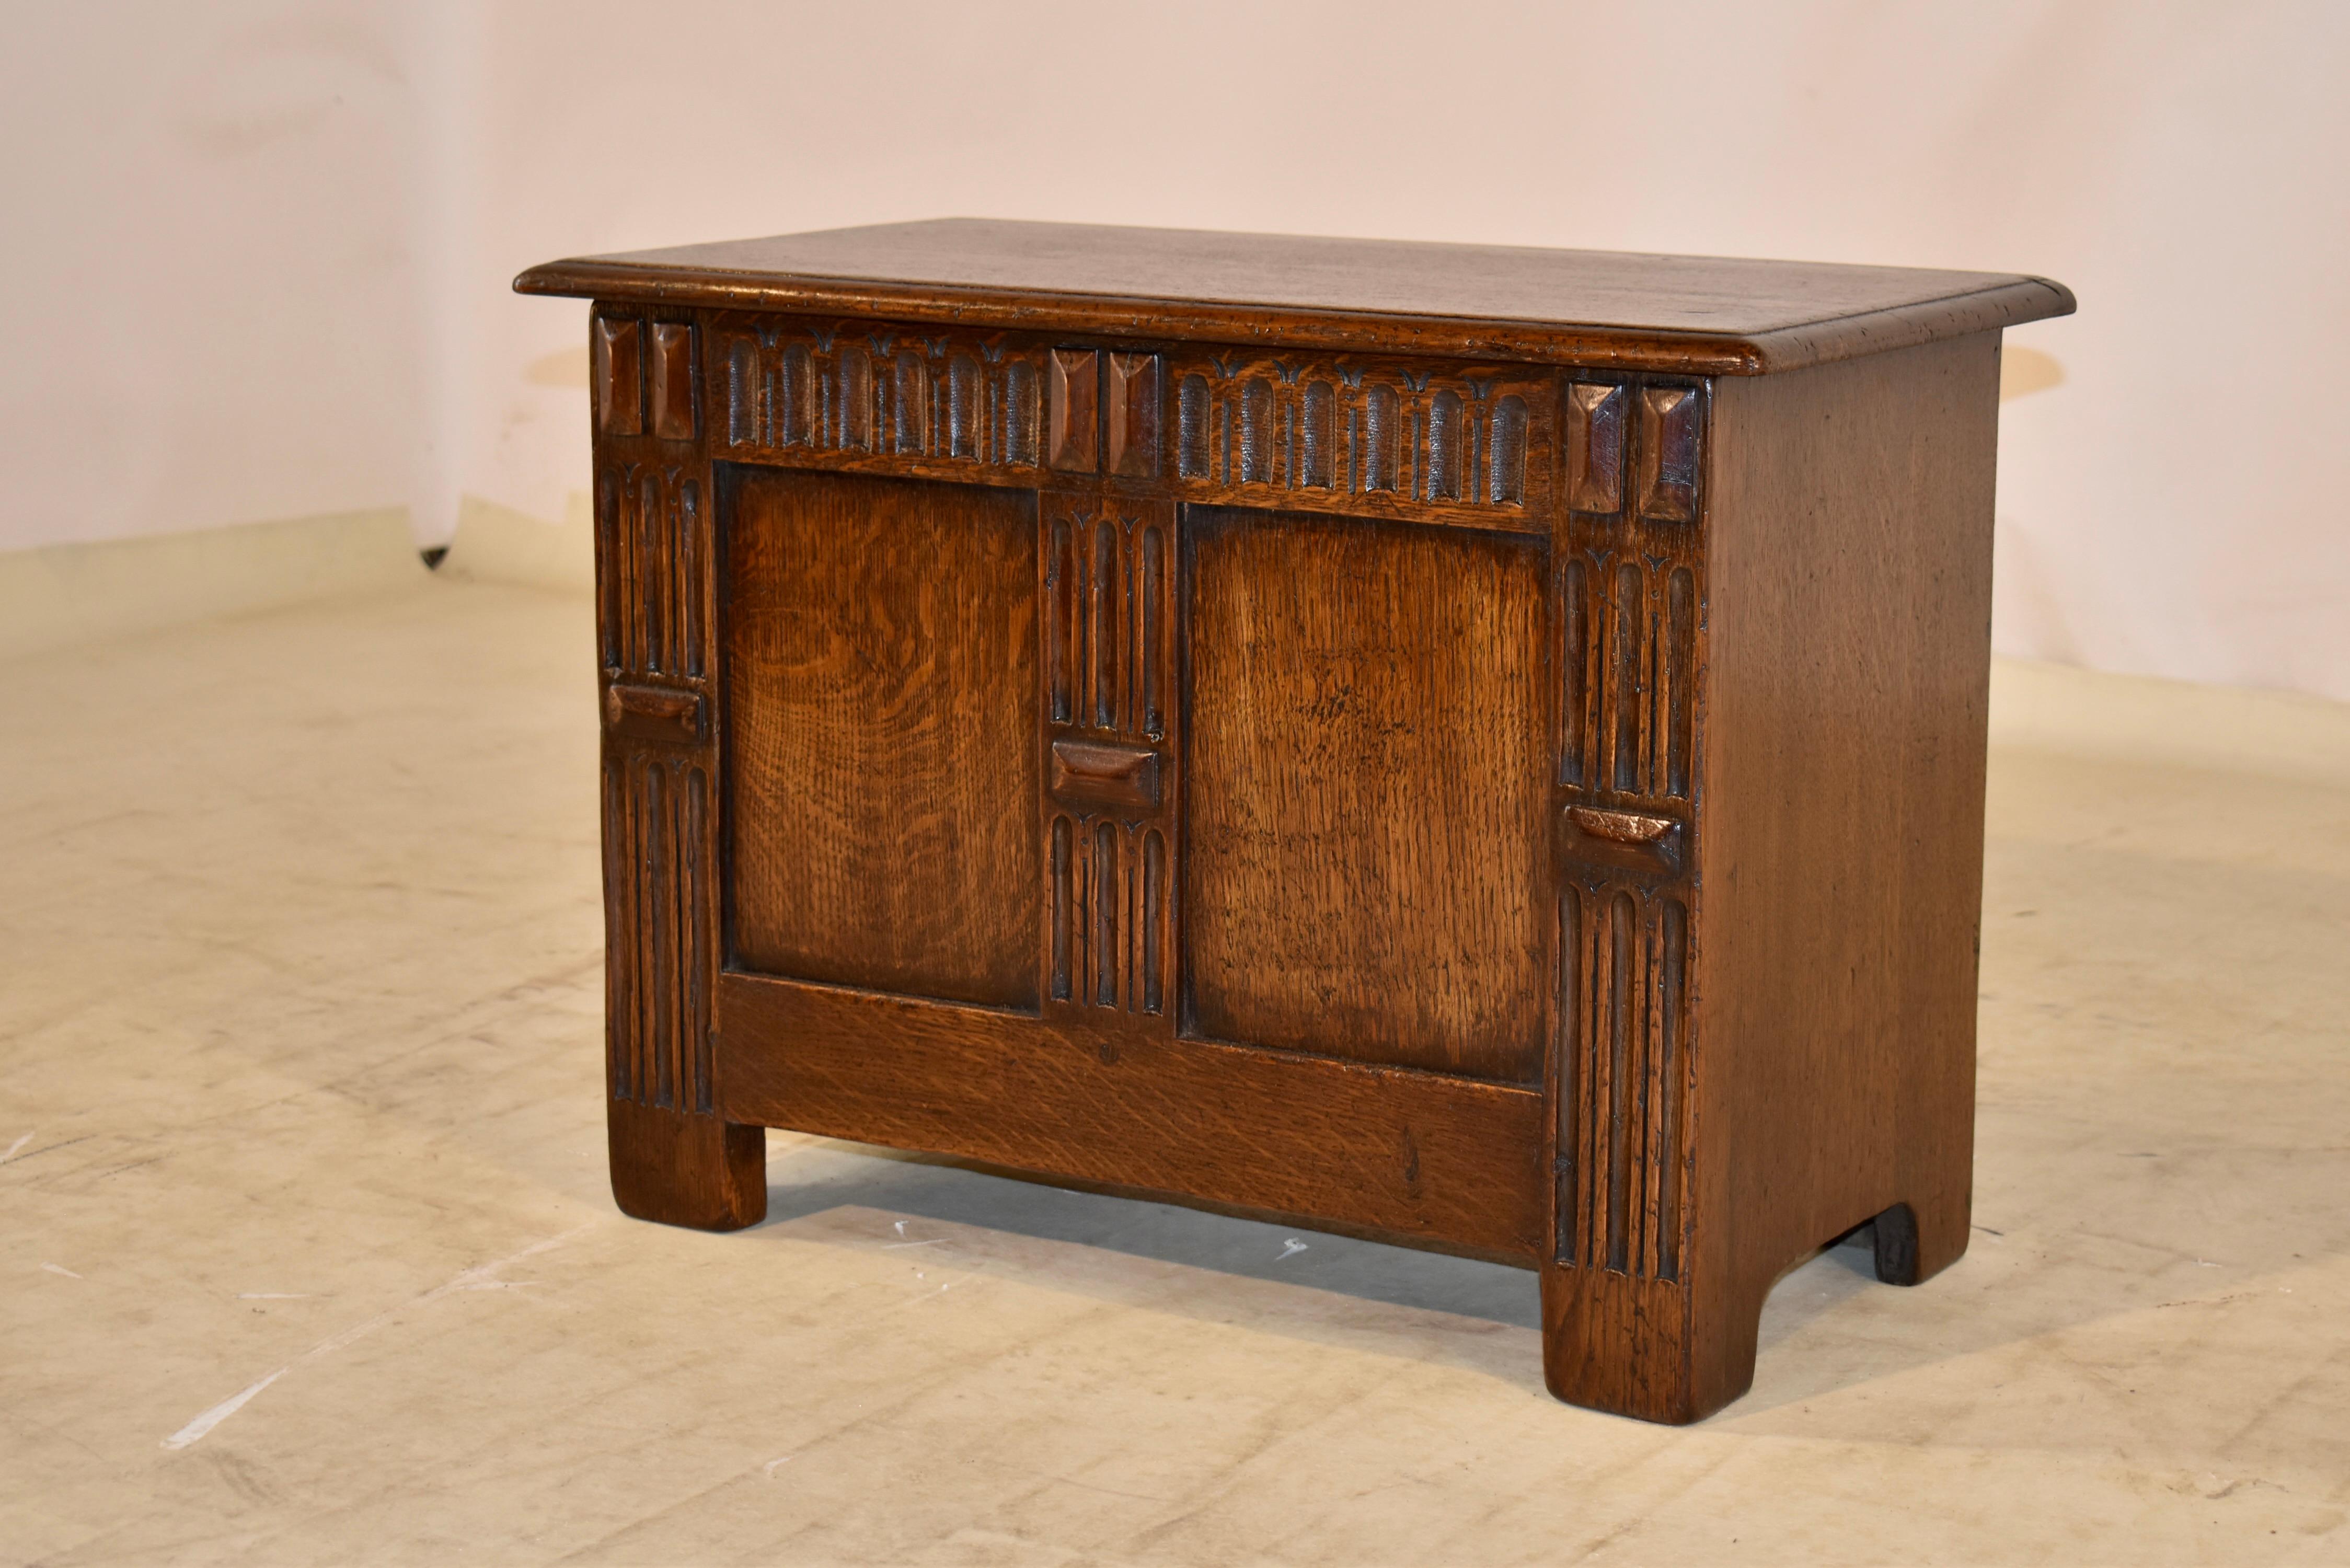 Early 20th Century English Oak Coffer, c. 1900 For Sale